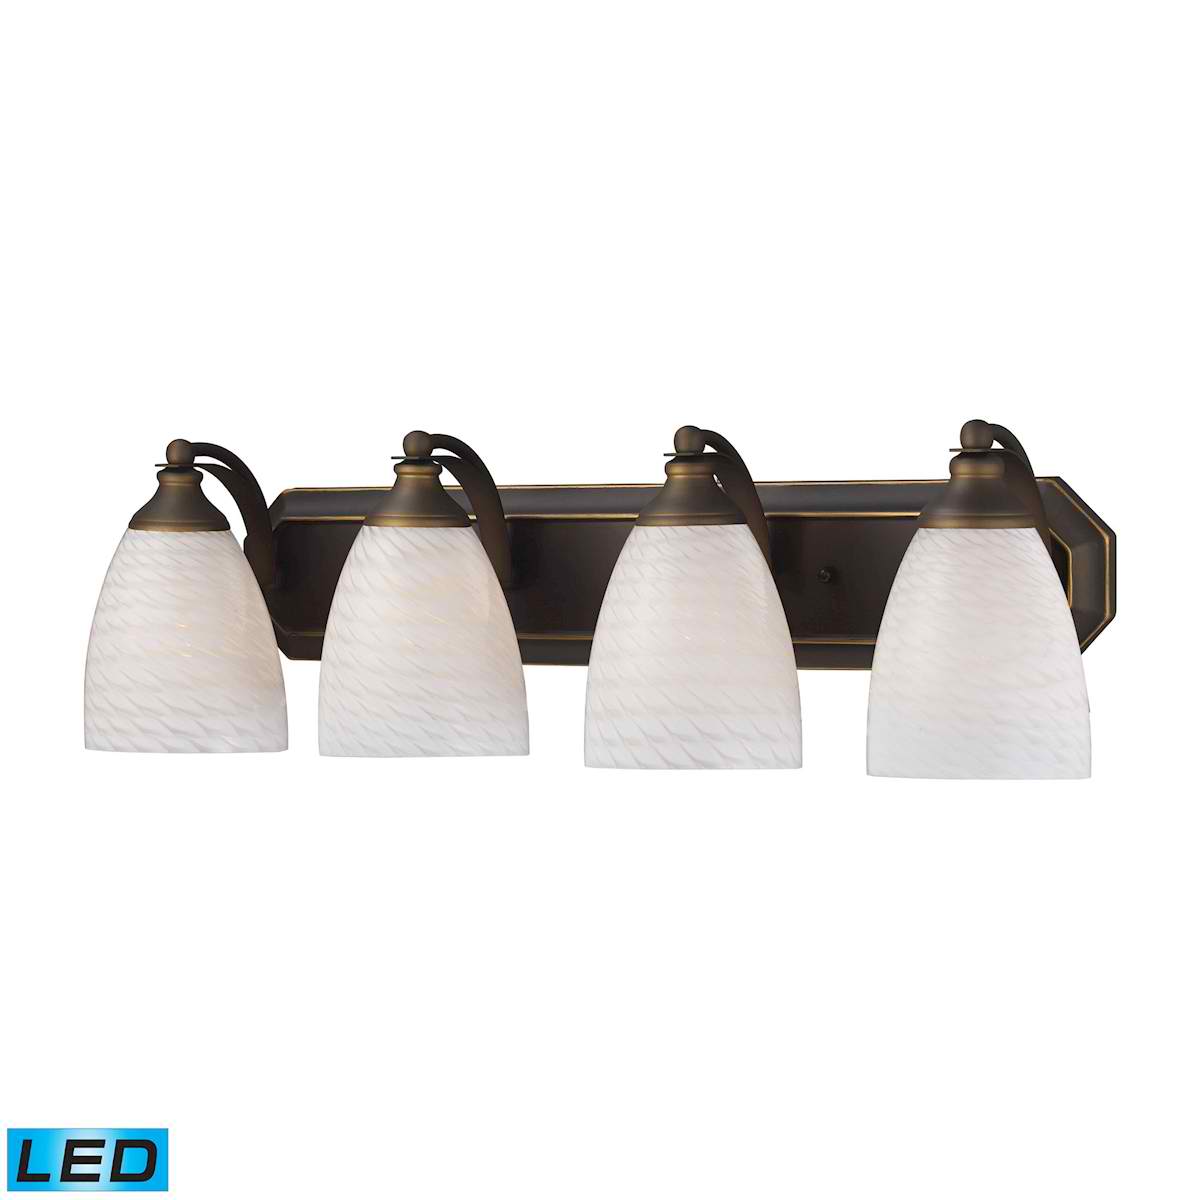 4 Light Vanity in Aged Bronze and White Swirl Glass - LED, 800 Lumens (3200 Lumens Total) with Full Scale